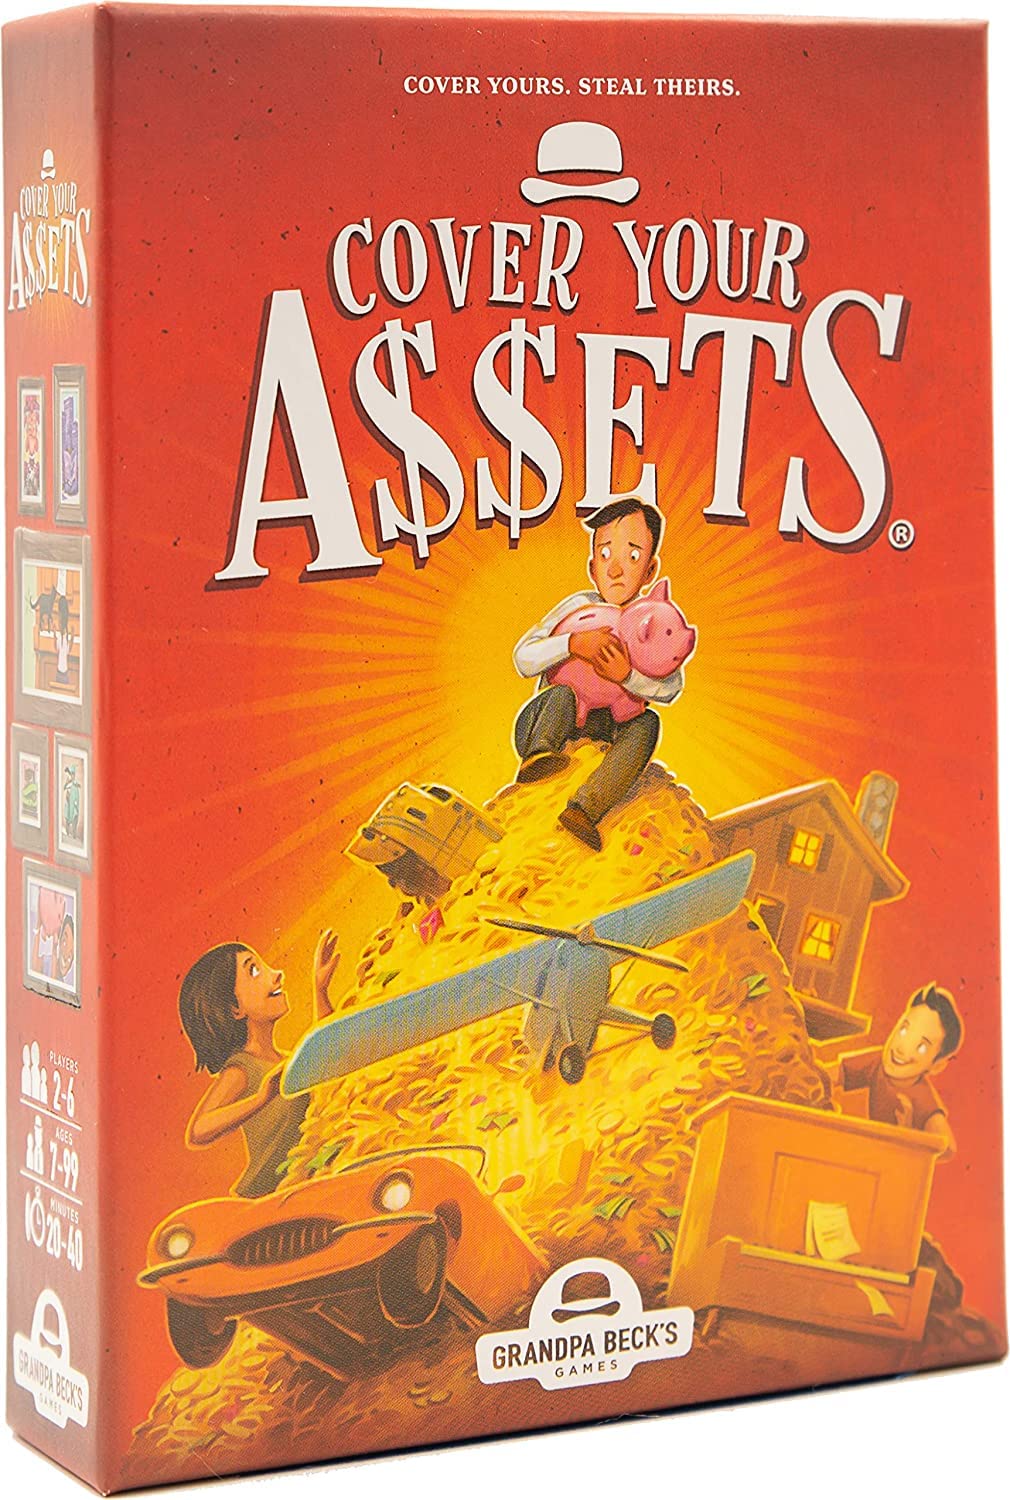 Grandpa Beck's Games Cover Your Assets Card Game - Amazon: $10.14